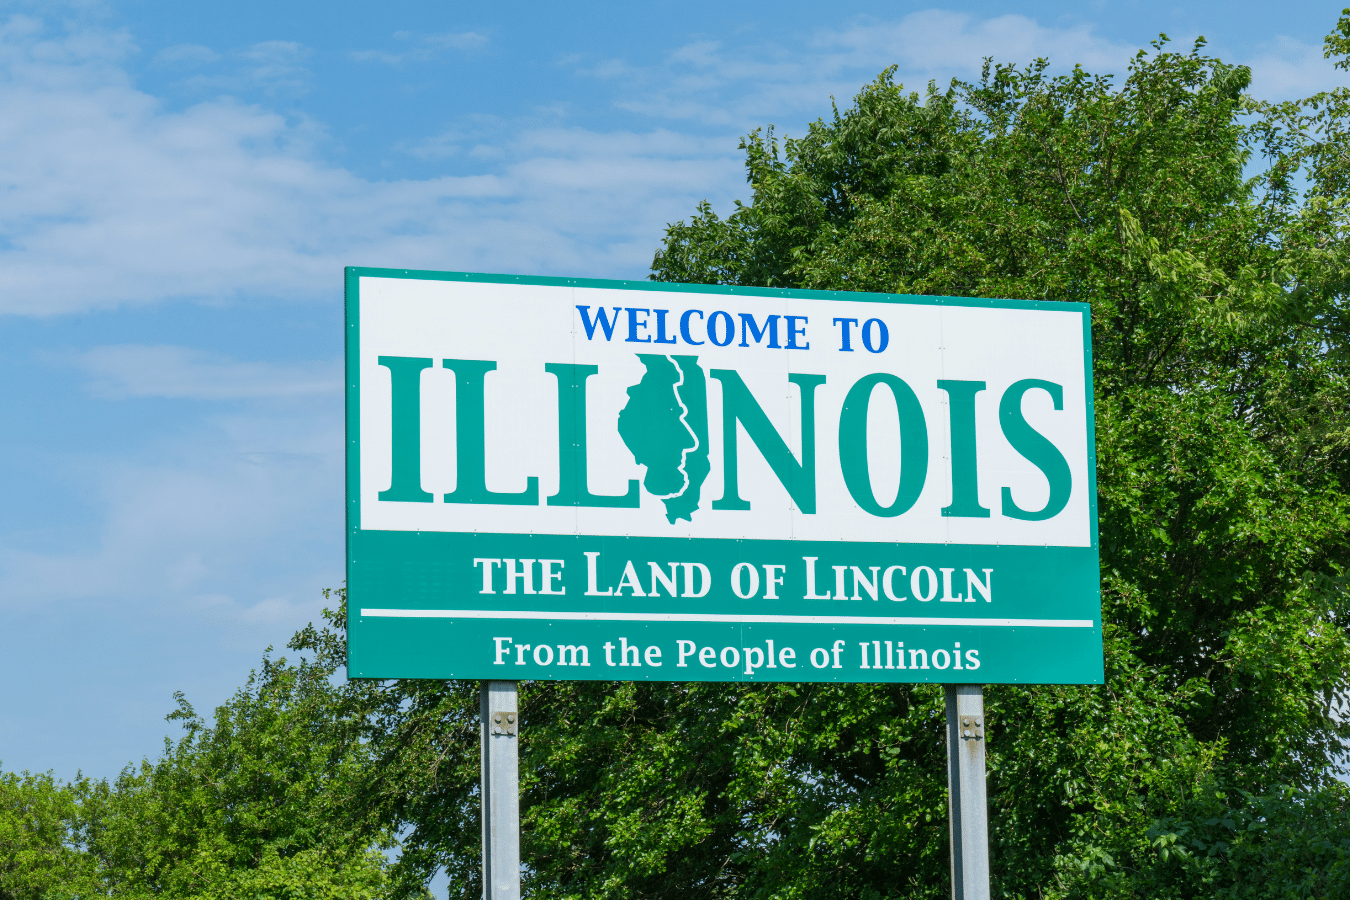 Sign that welcomes people to Illinois from the people in Illinois